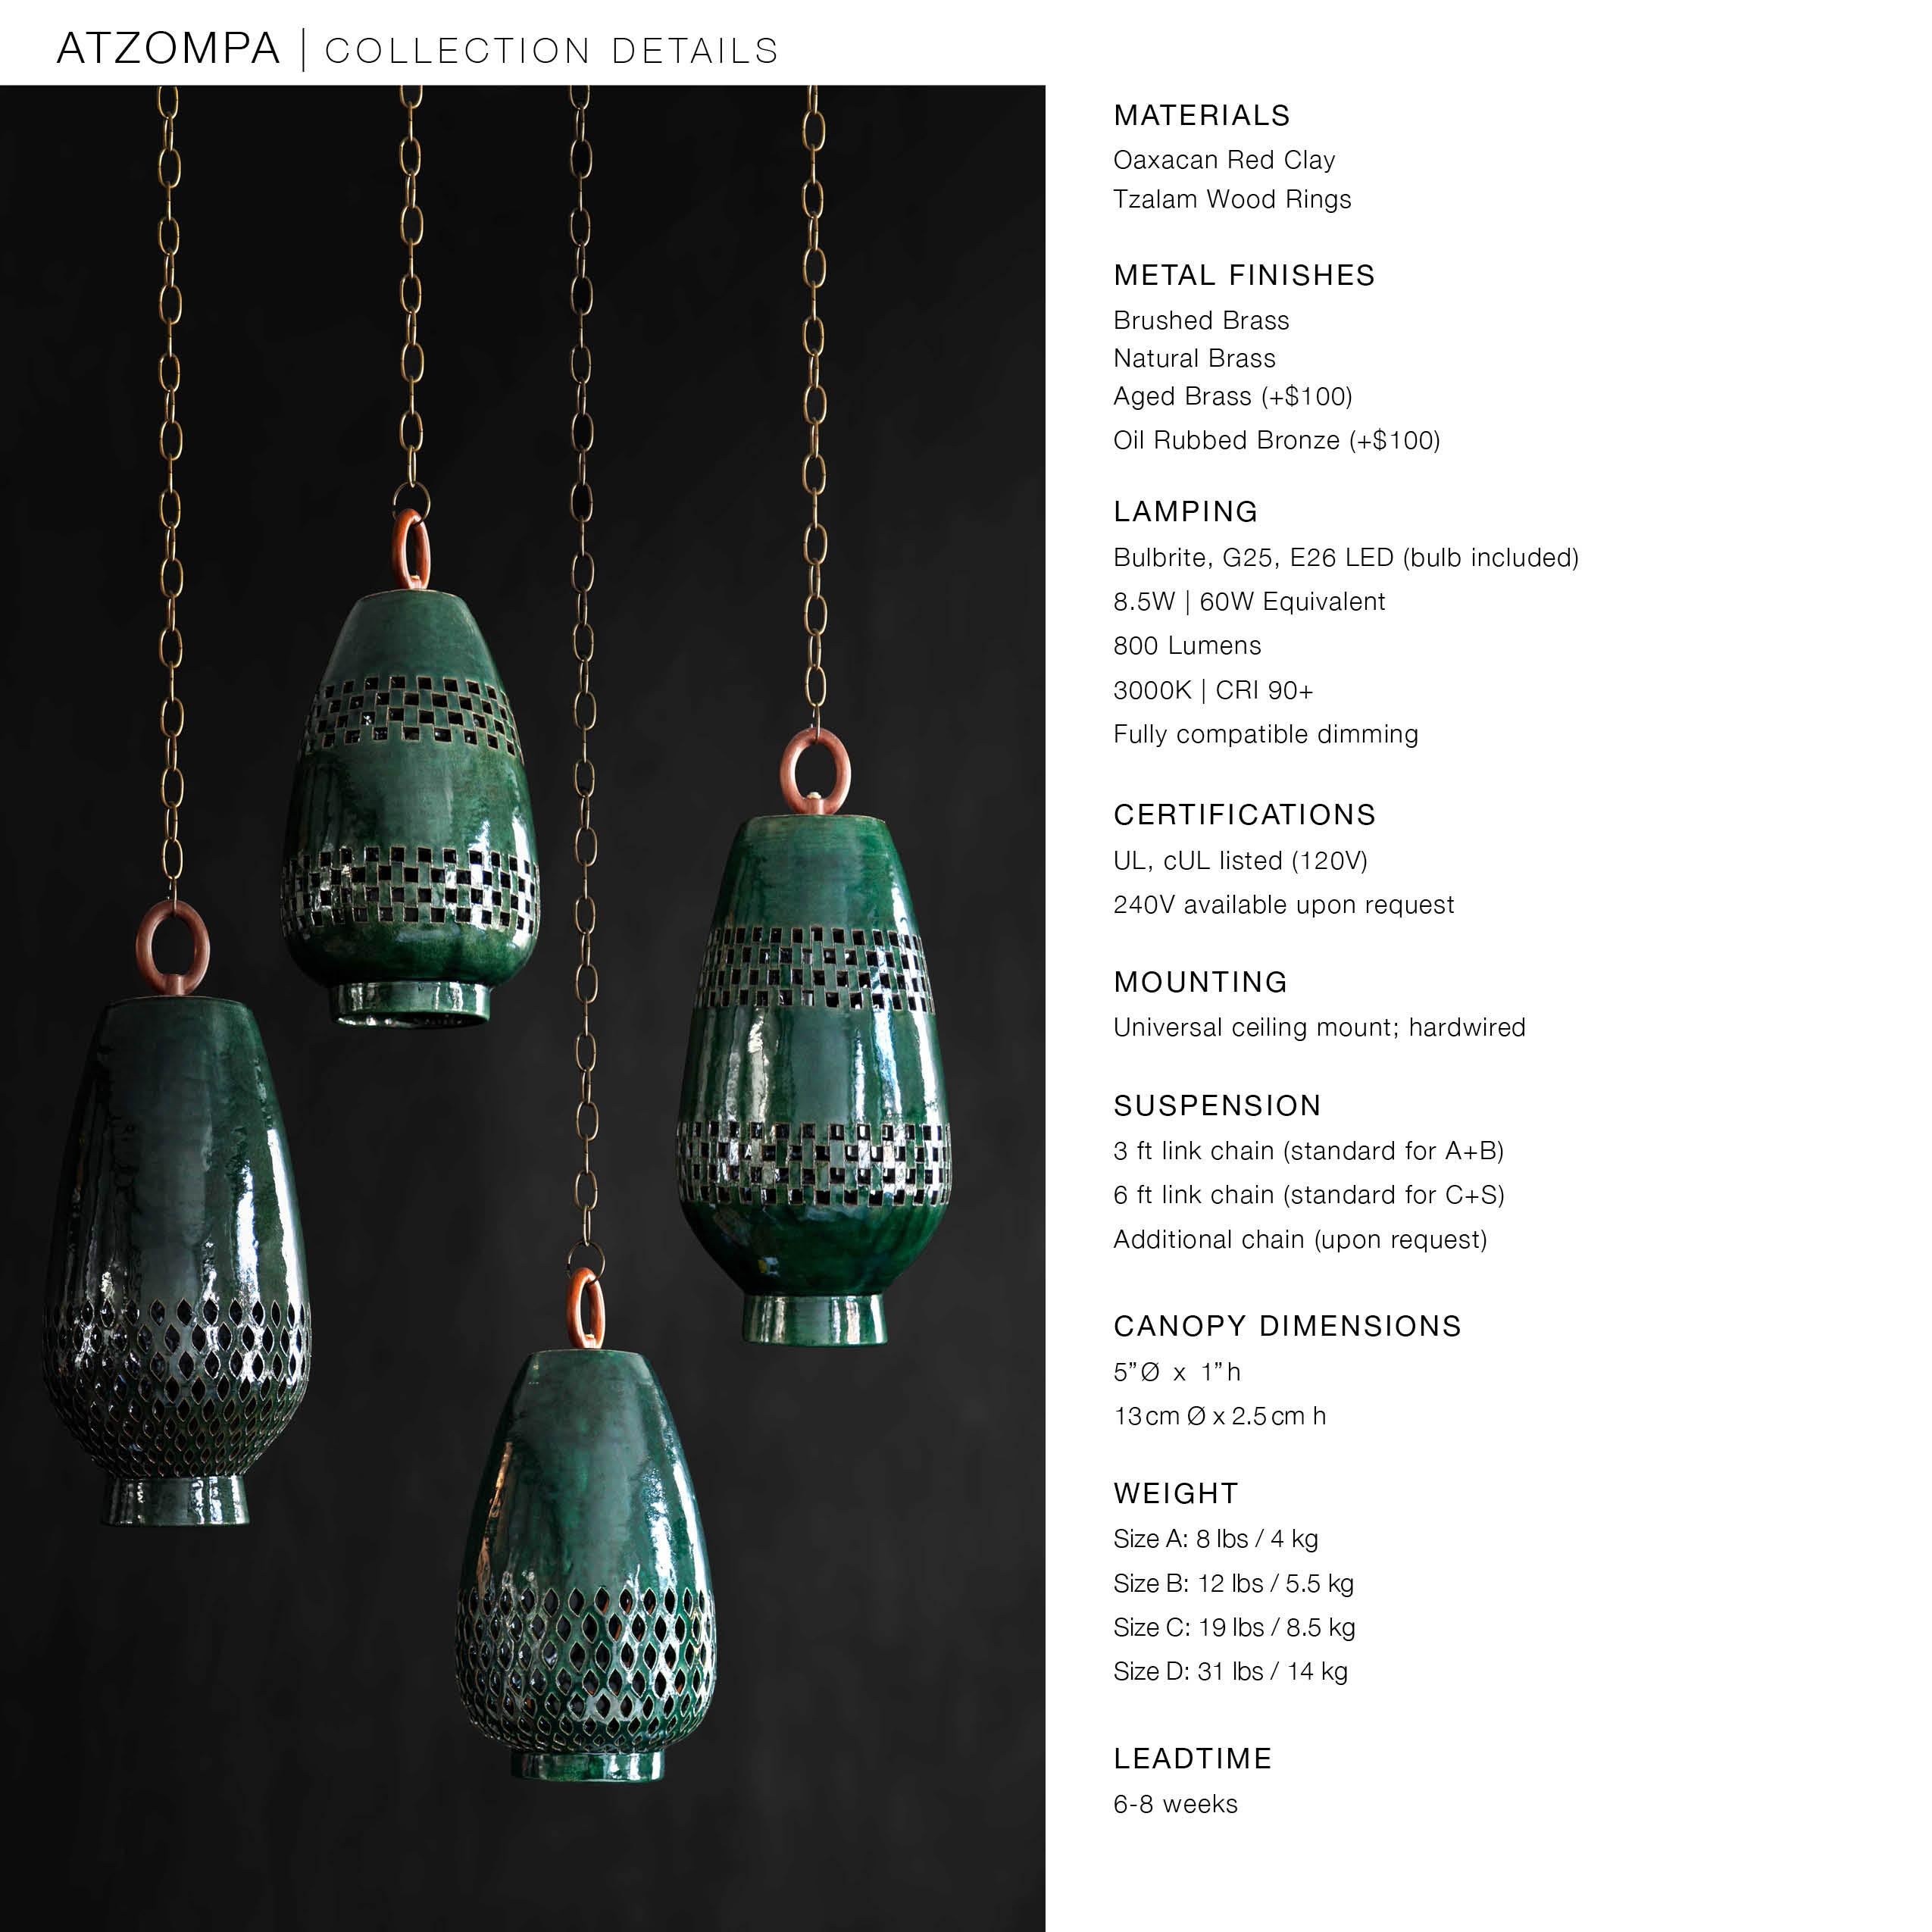 Small Emerald Ceramic Pendant Light, Aged Brass, Ajedrez Atzompa Collection In New Condition For Sale In New York, NY